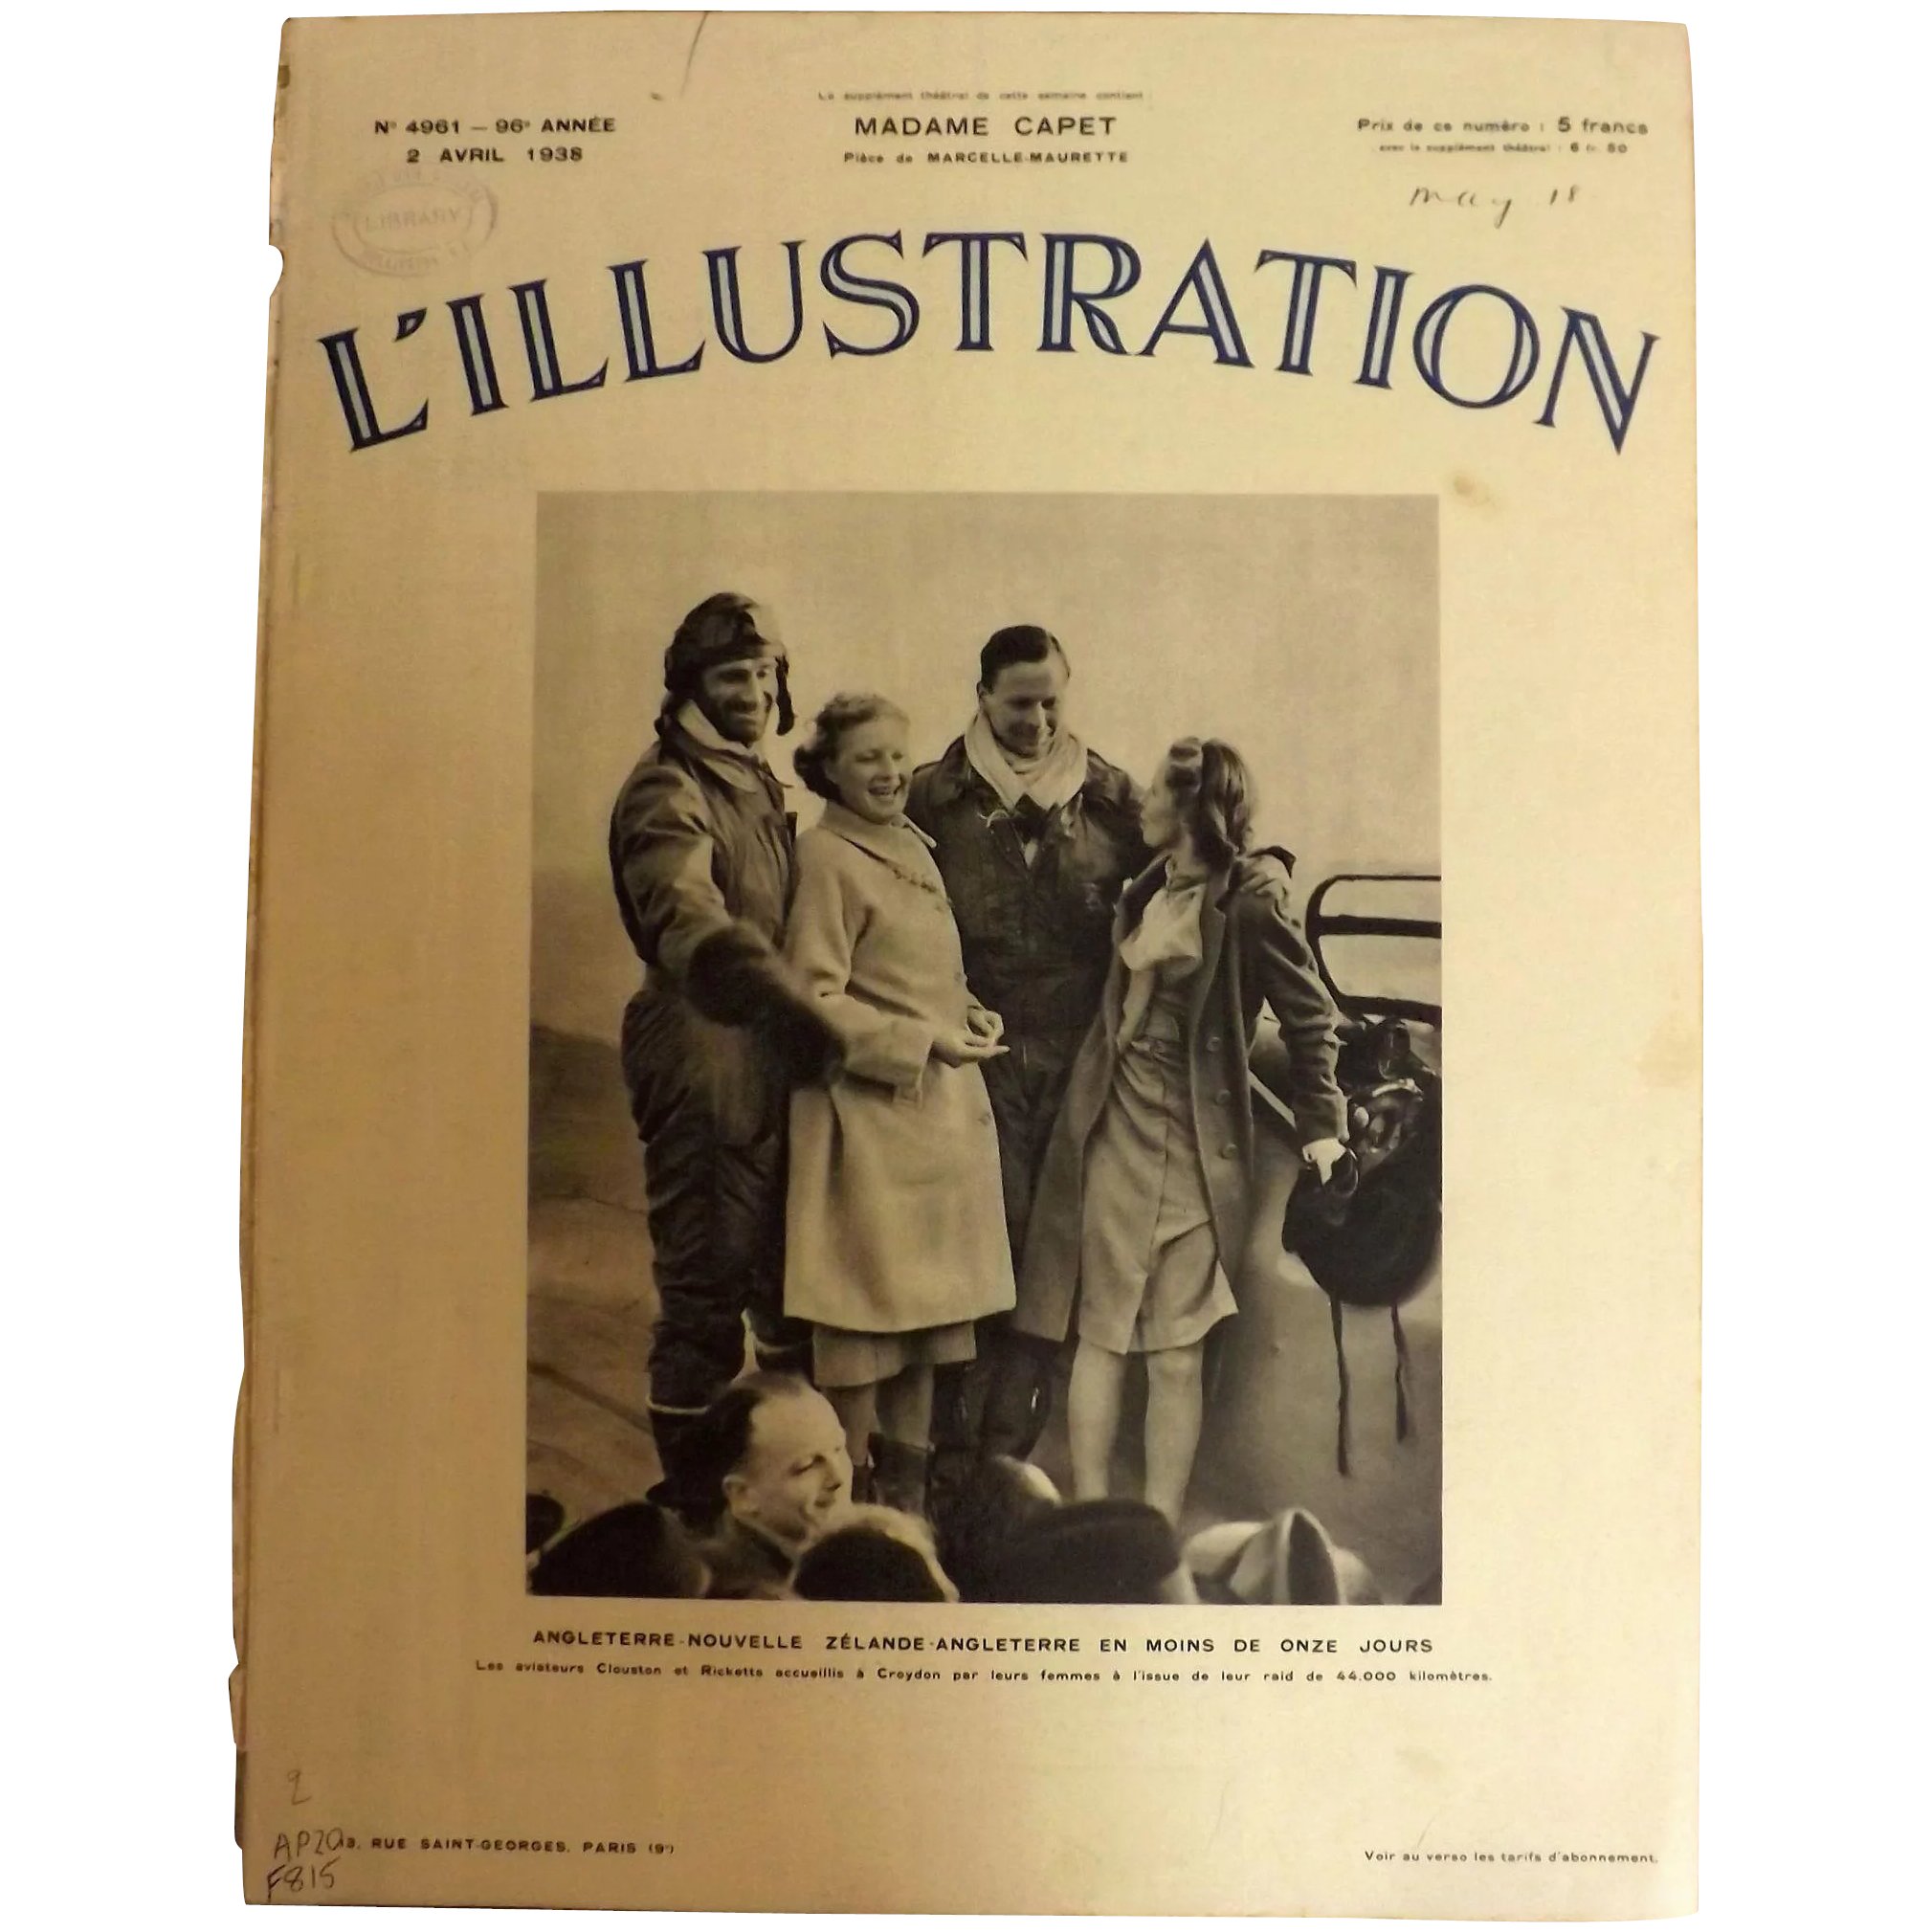 L'IIlustration French Magazine Original FRONT COVER 1938 - World Record Flight